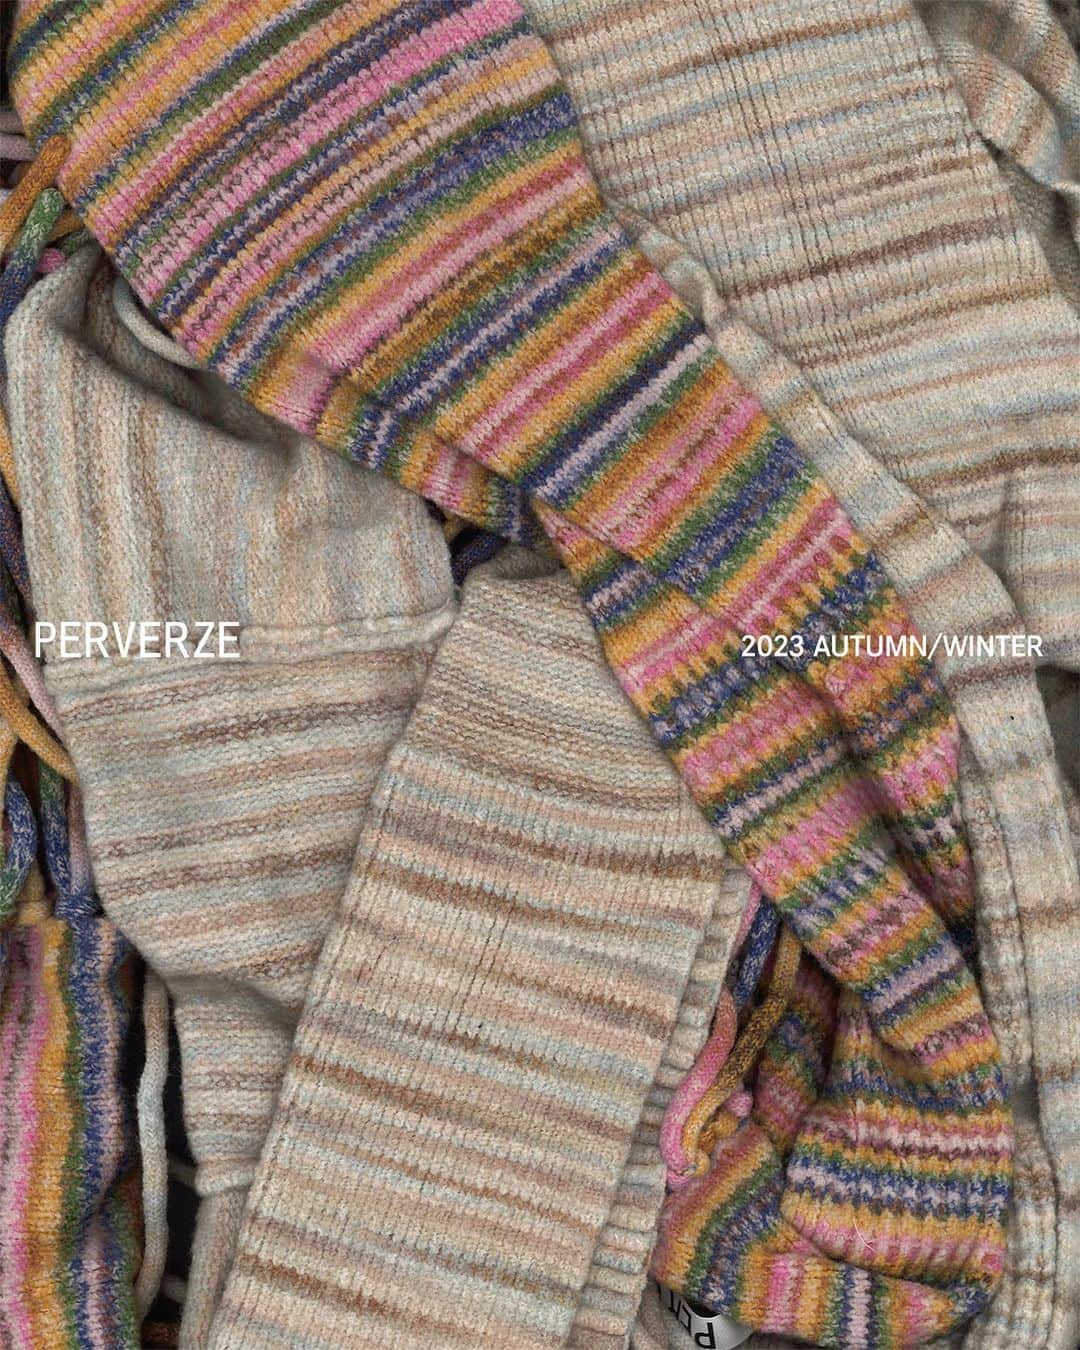 PERVERZE_OFFICIALのインスタグラム：「Scarf made of elastic cotton-nylon raised fabric with kasuri dyed yarn. Super long scarf with a mix of various knitting fabrics, which can accentuate your styling just by wrapping it around your body.  #PERVERZE #AW23 #PERVERZE_AW23」